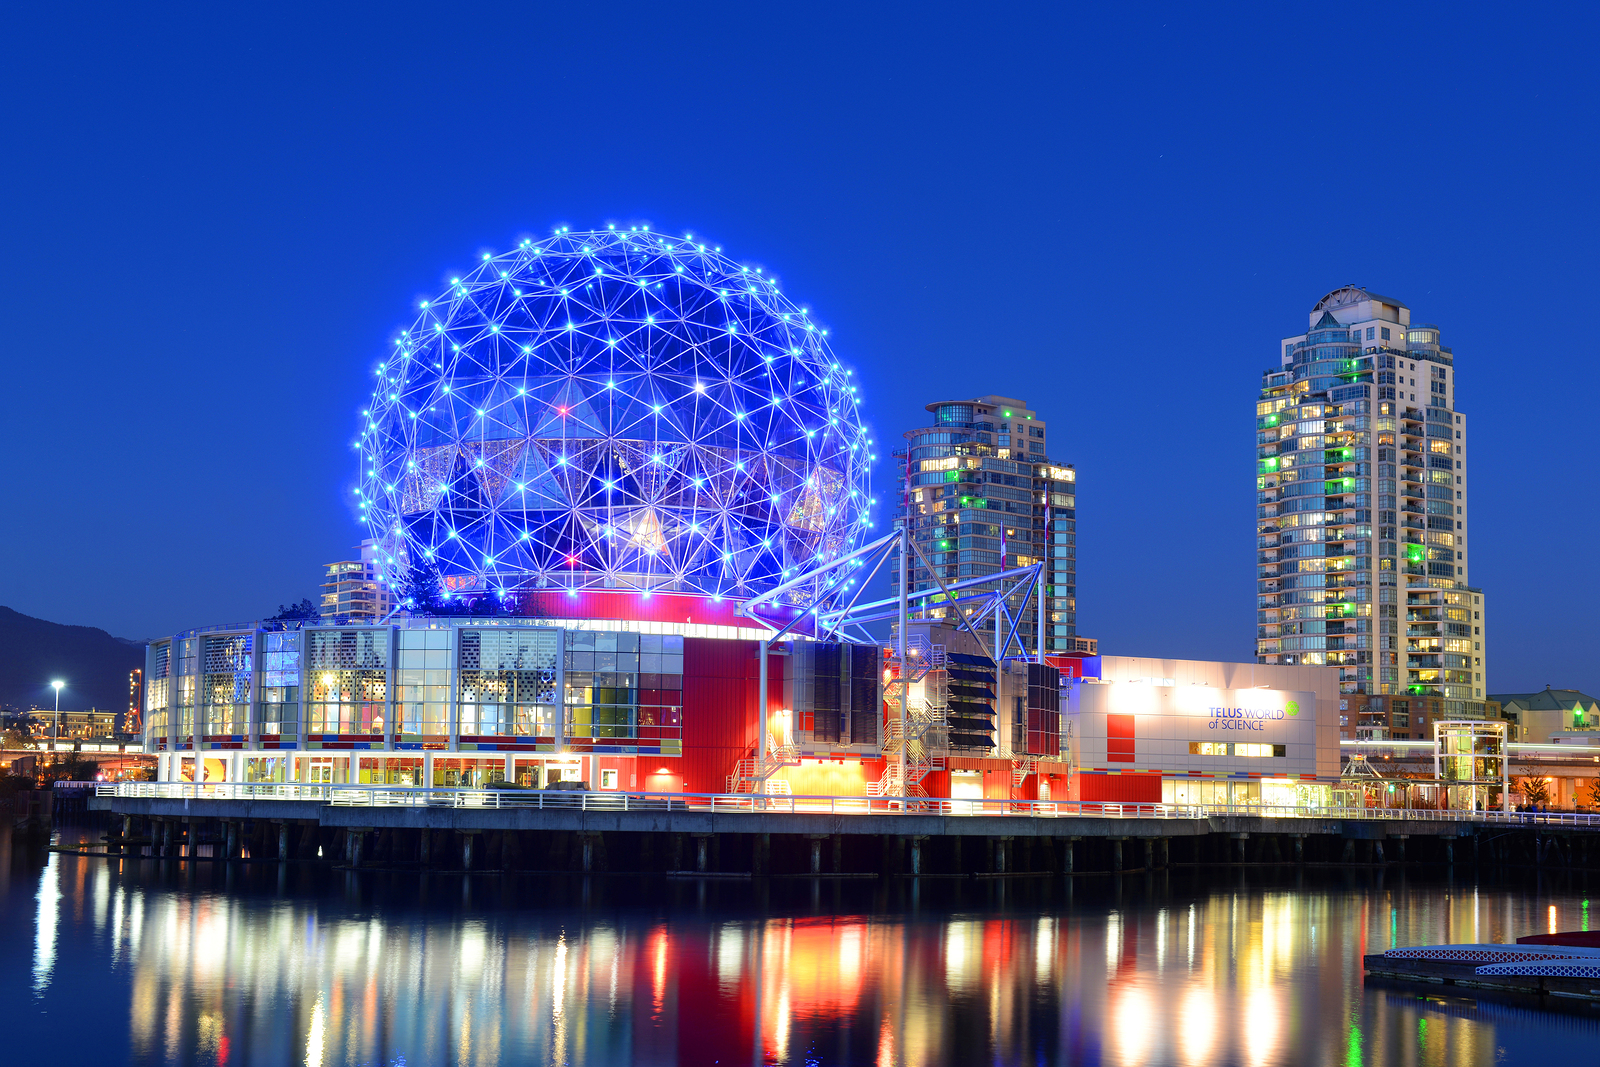 Vancouver Science World 